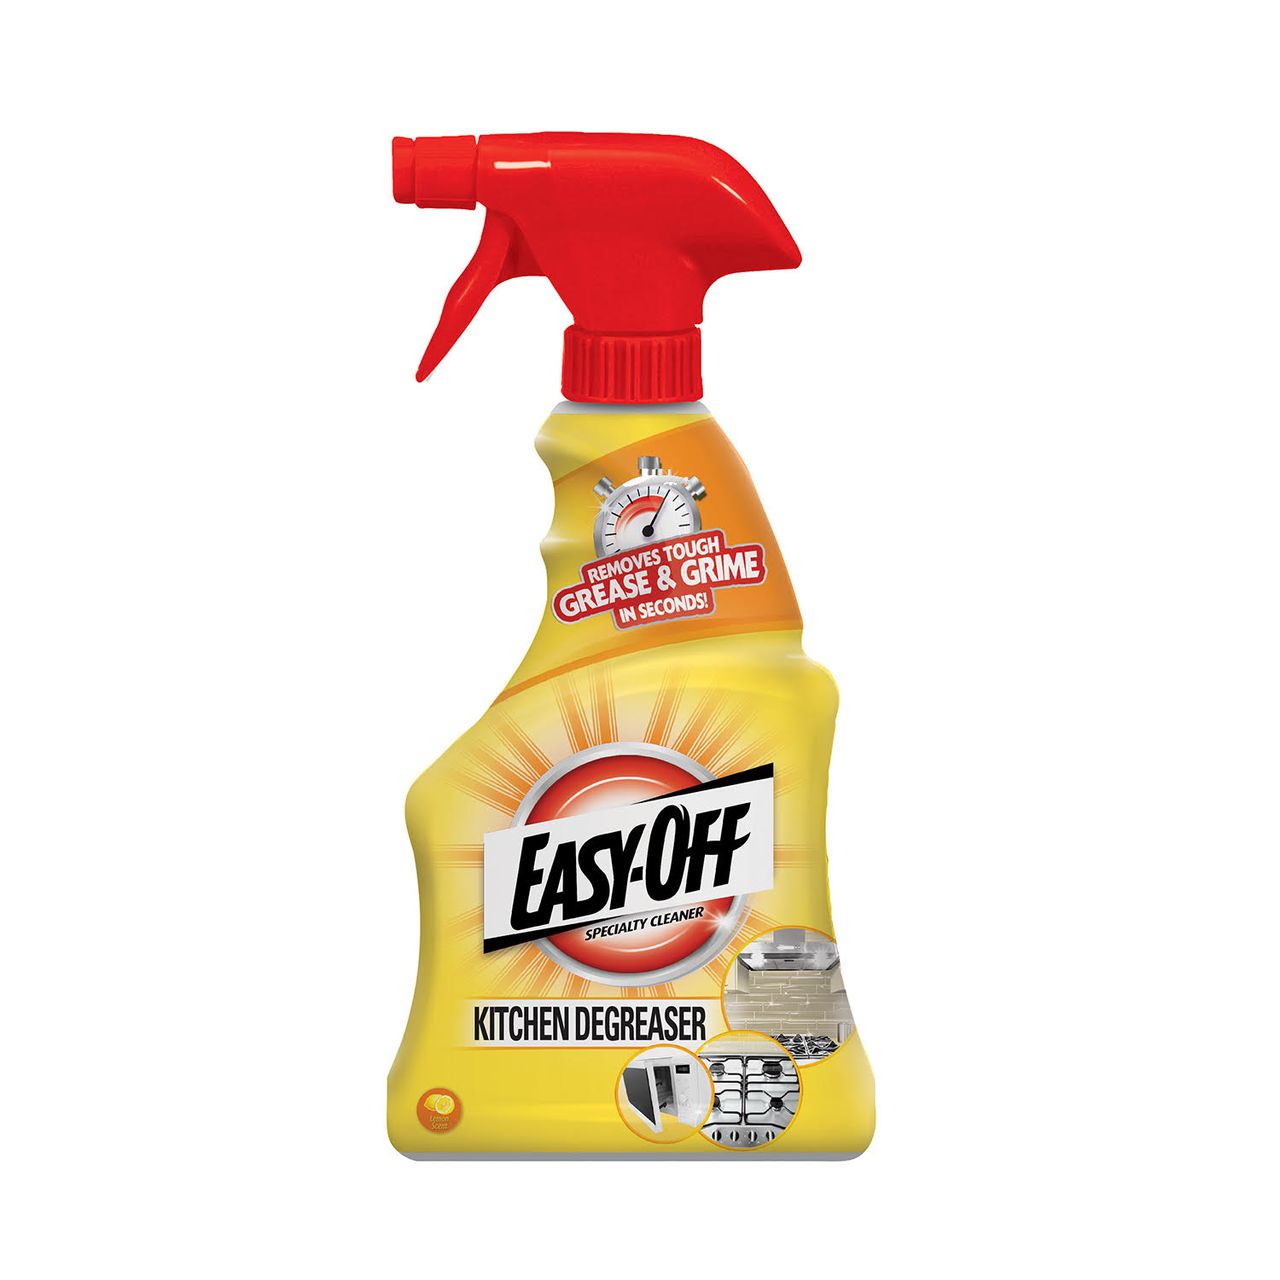 Easy Off Specialty Kitchen Degreaser